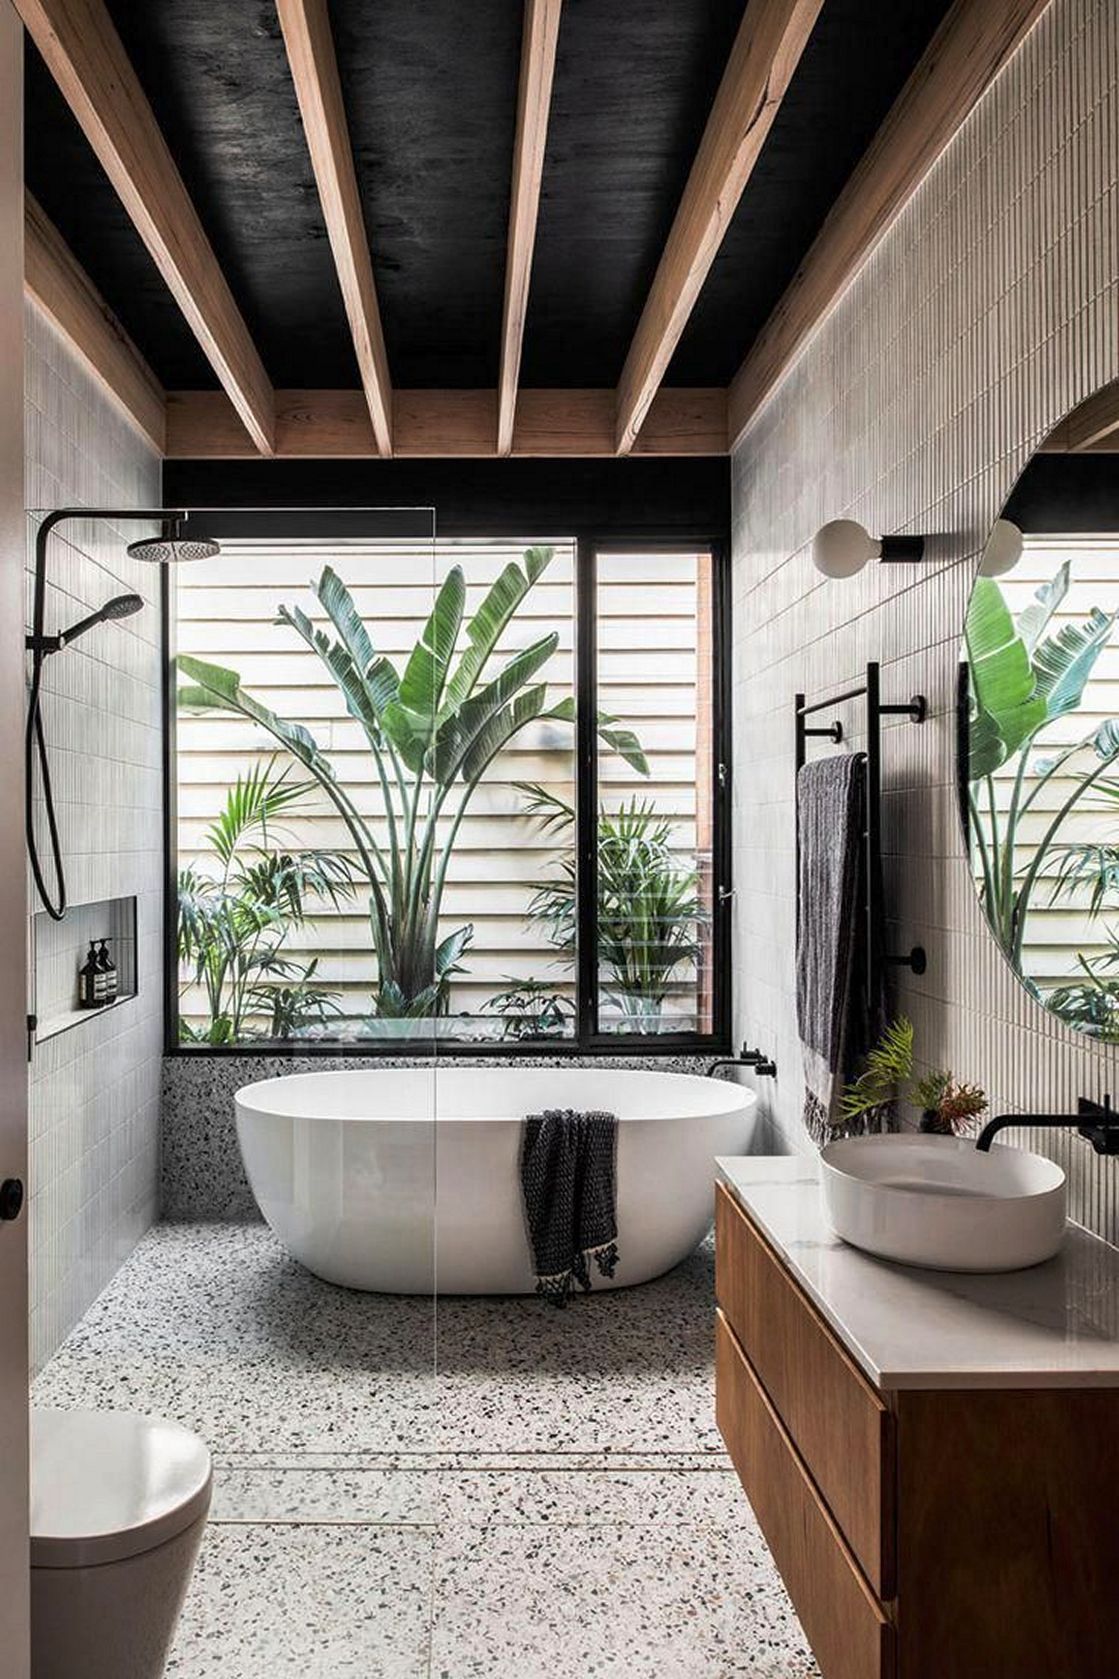 Bathroom remodeling ideas that will work for your home in New Year 2021 18